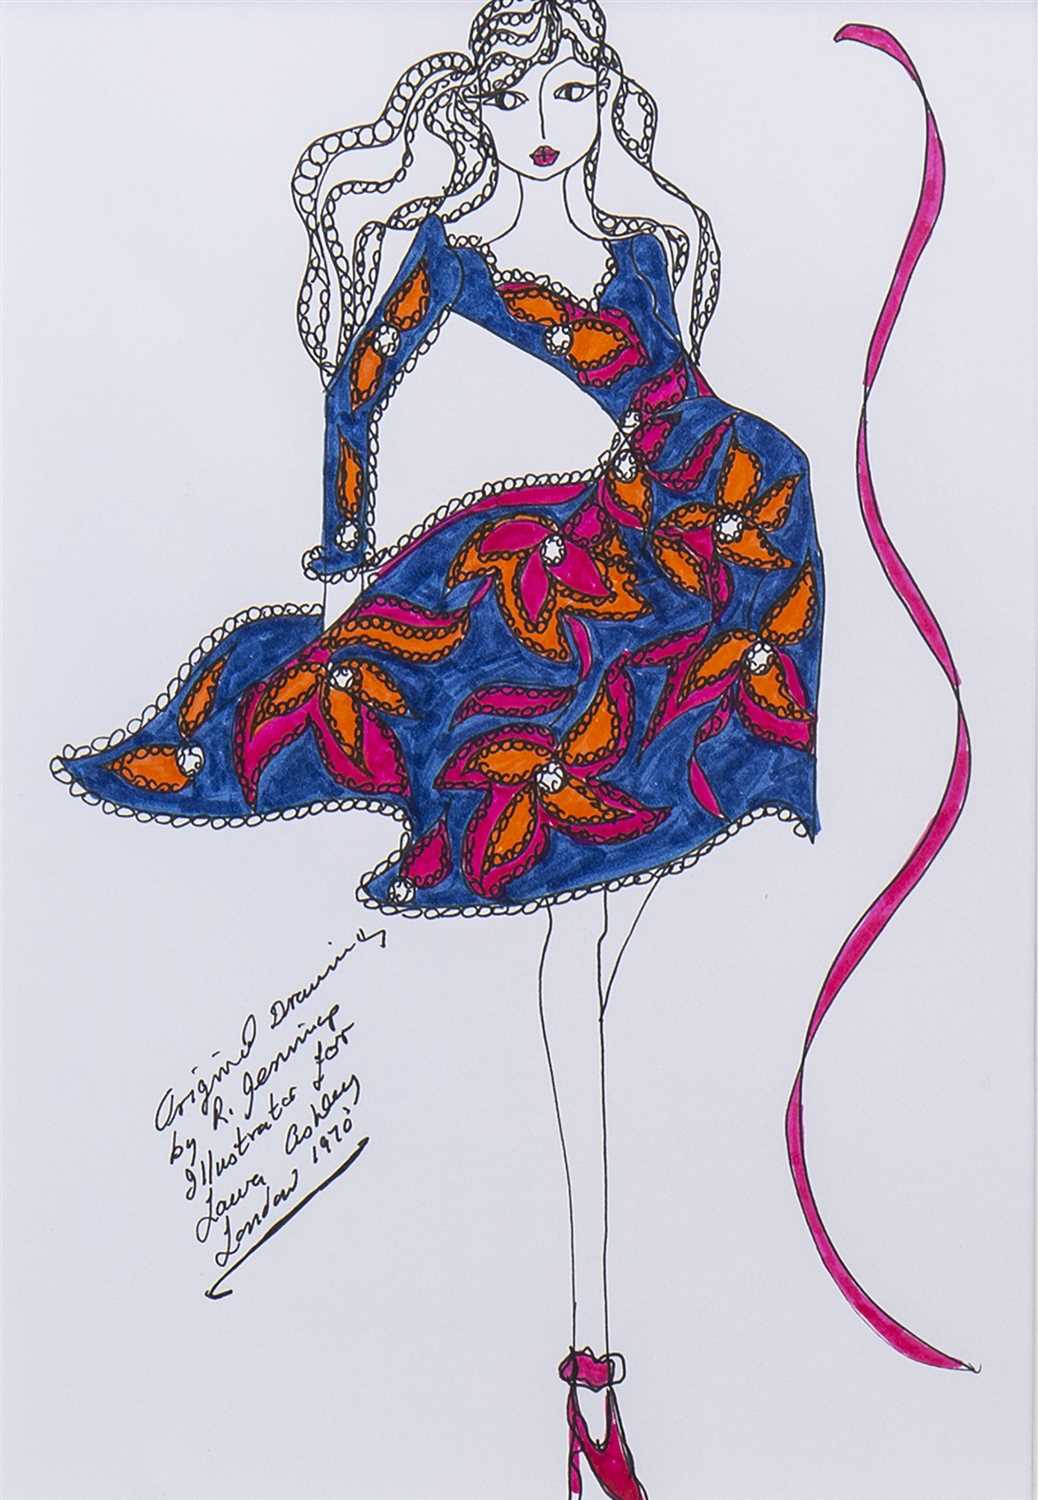 Lot 657 - ORIGINAL ILLUSTRATION OF DESIGNS FOR LAURA ASHLEY, A PEN ON CARD BY ROZ JENNINGS